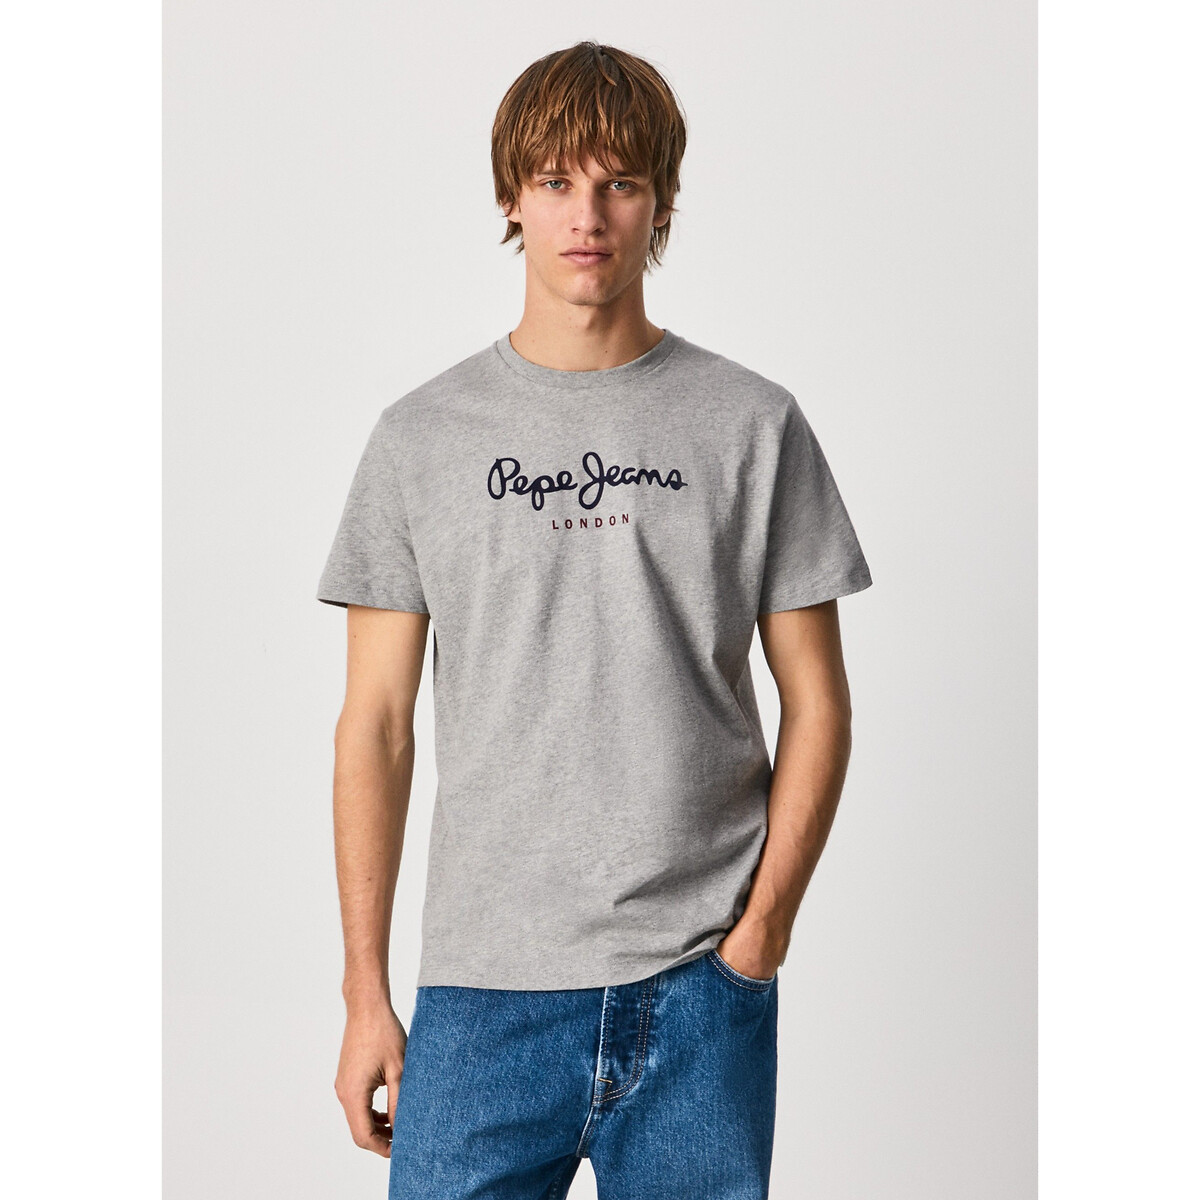 in t-shirt with logo La Eggo Jeans neck | print Redoute Pepe crew cotton